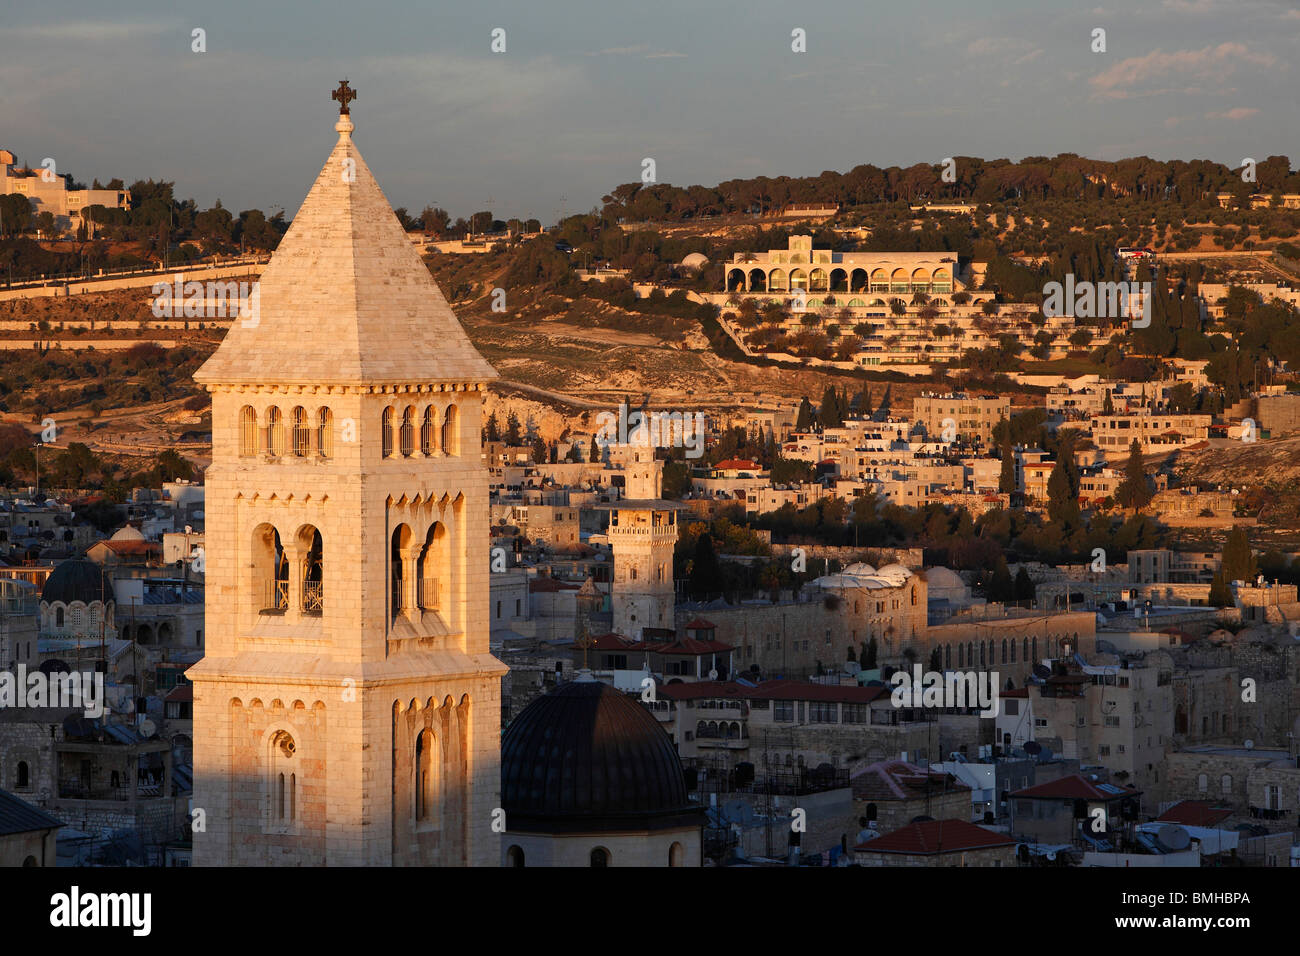 Israel,Jerusalem,Church of the Redeemer,Old city Stock Photo